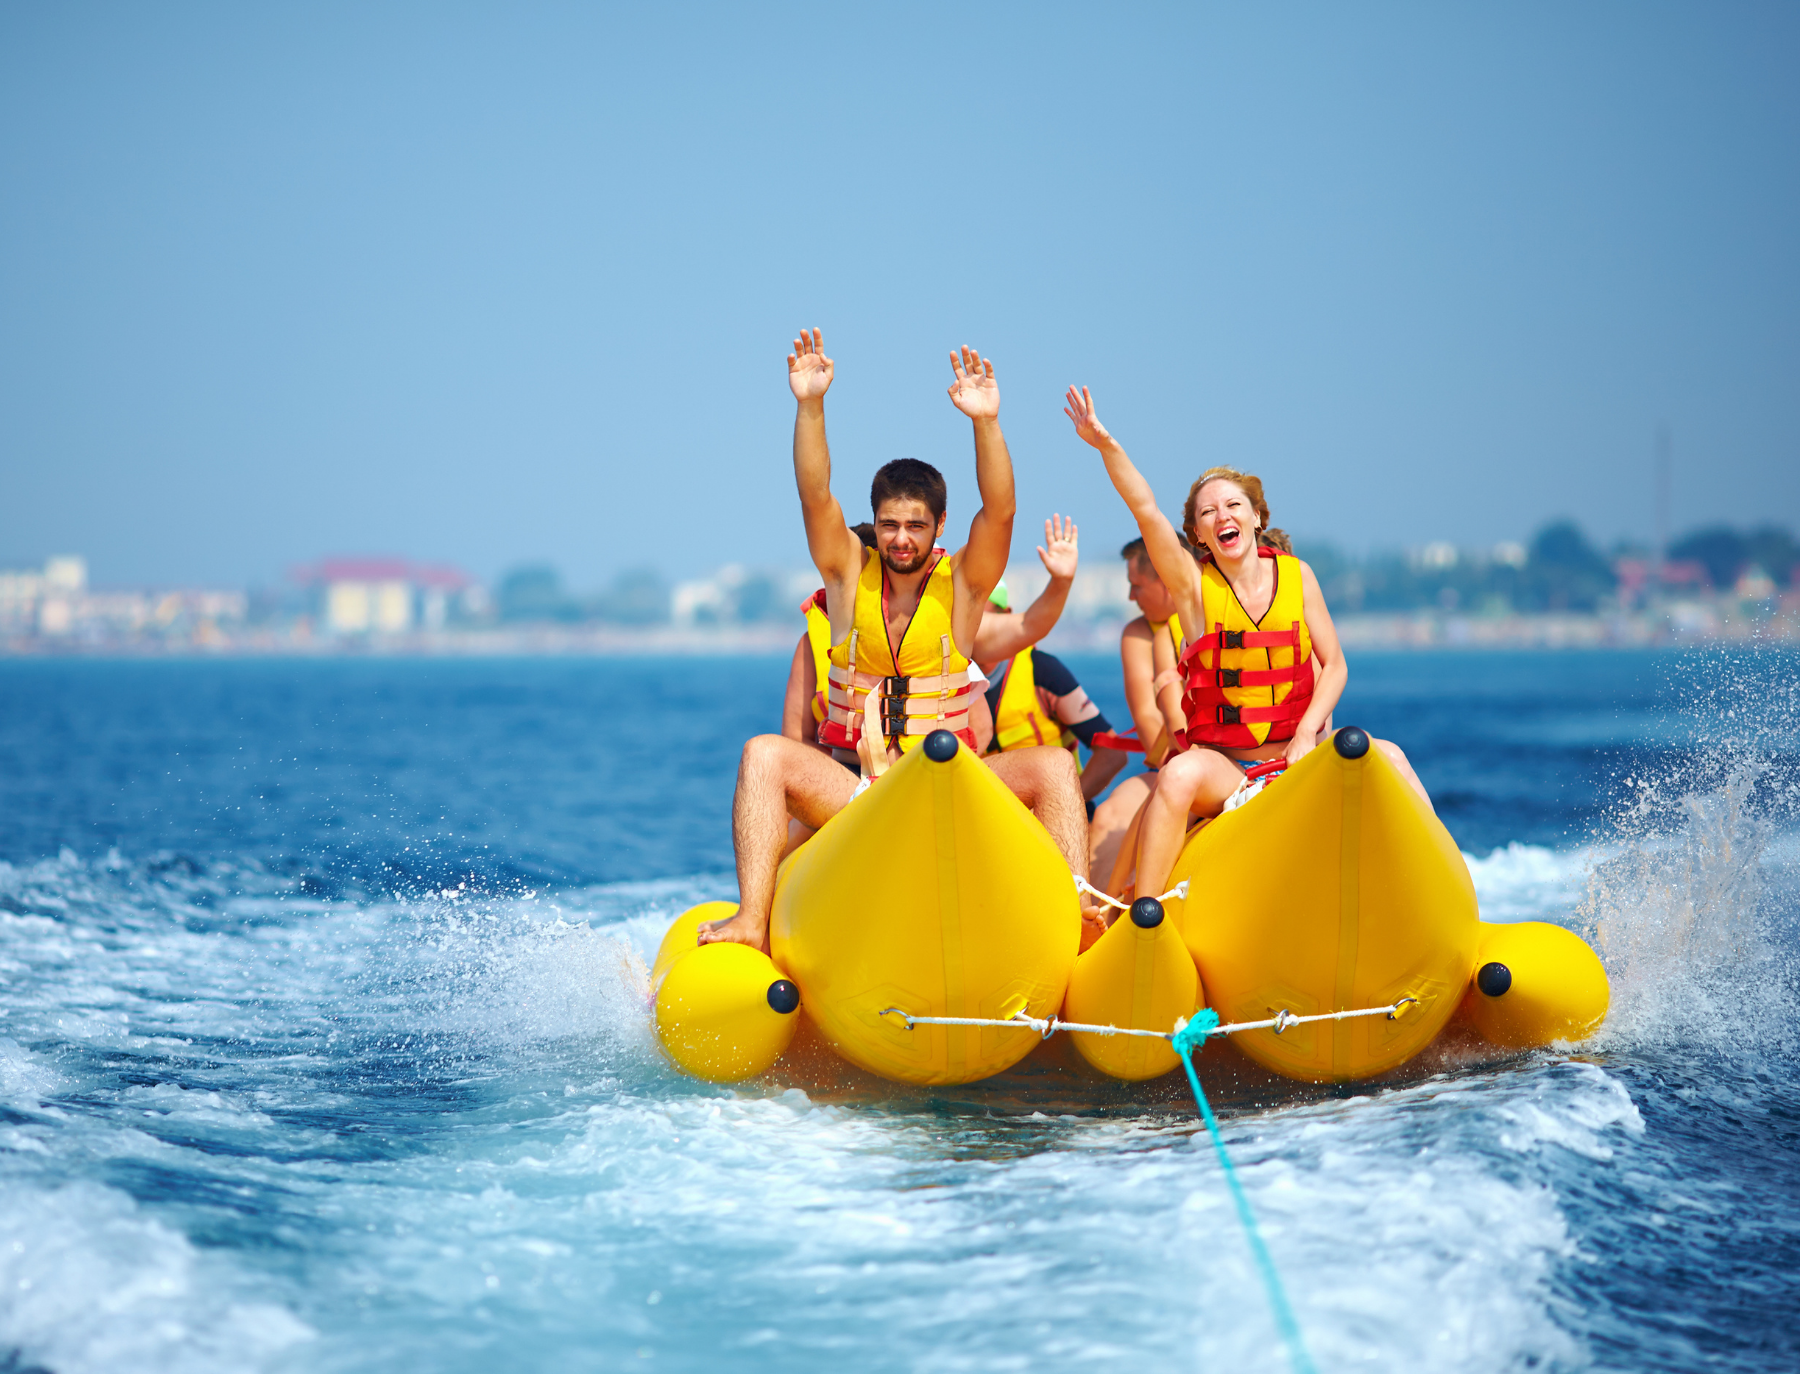 Happy people riding on a banana boat